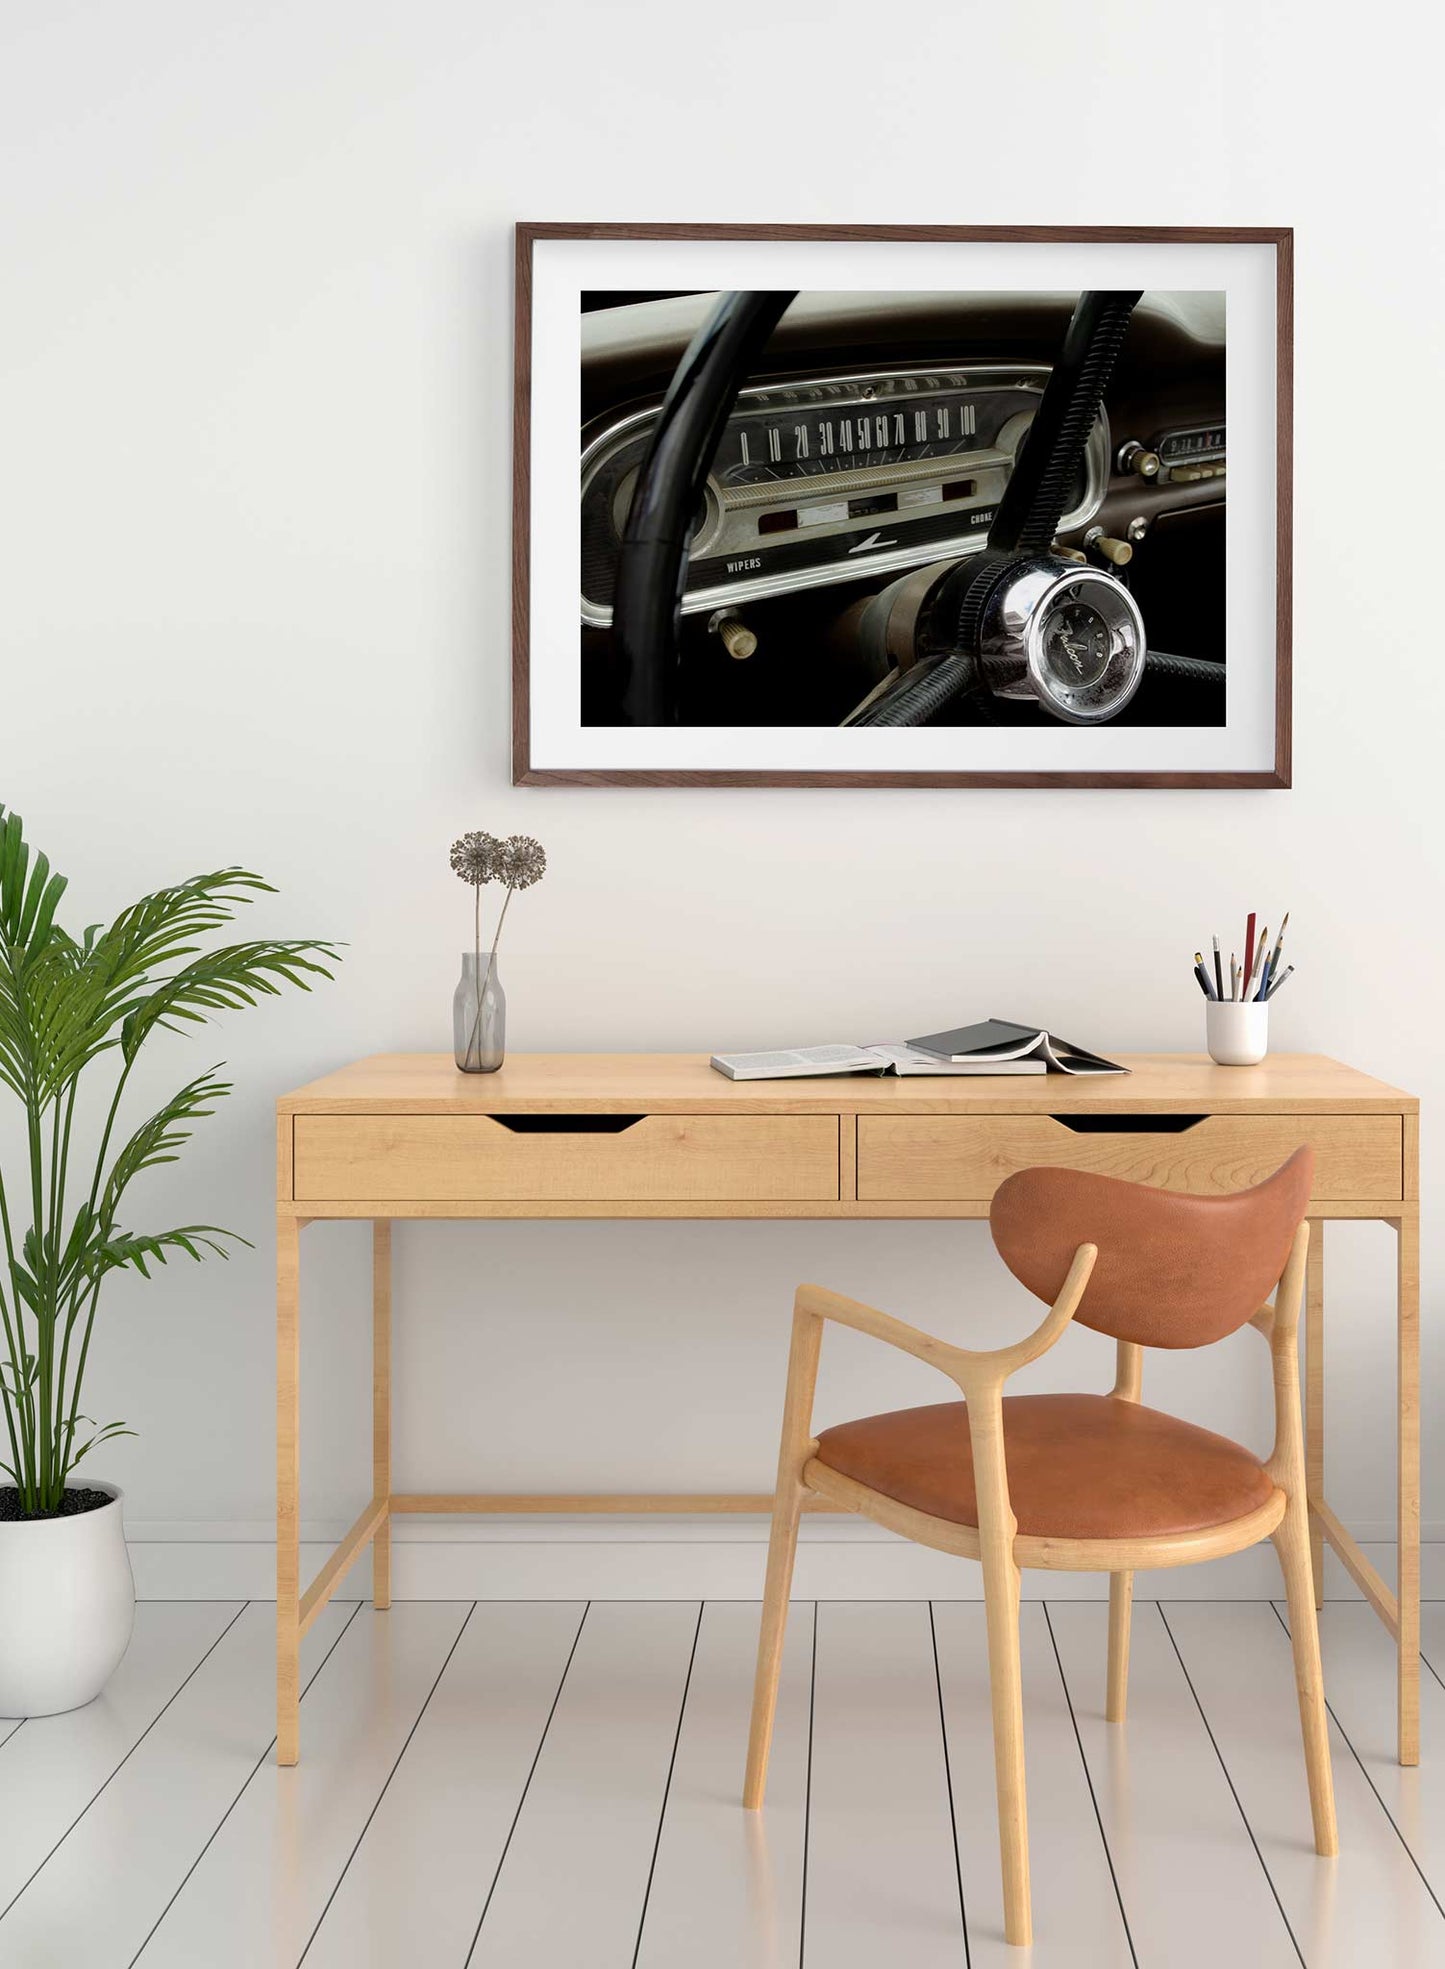 Beep Beep! is a vintage photography poster of a 60's Ford Falcon's steering wheel and dashboard by Opposite Wall.